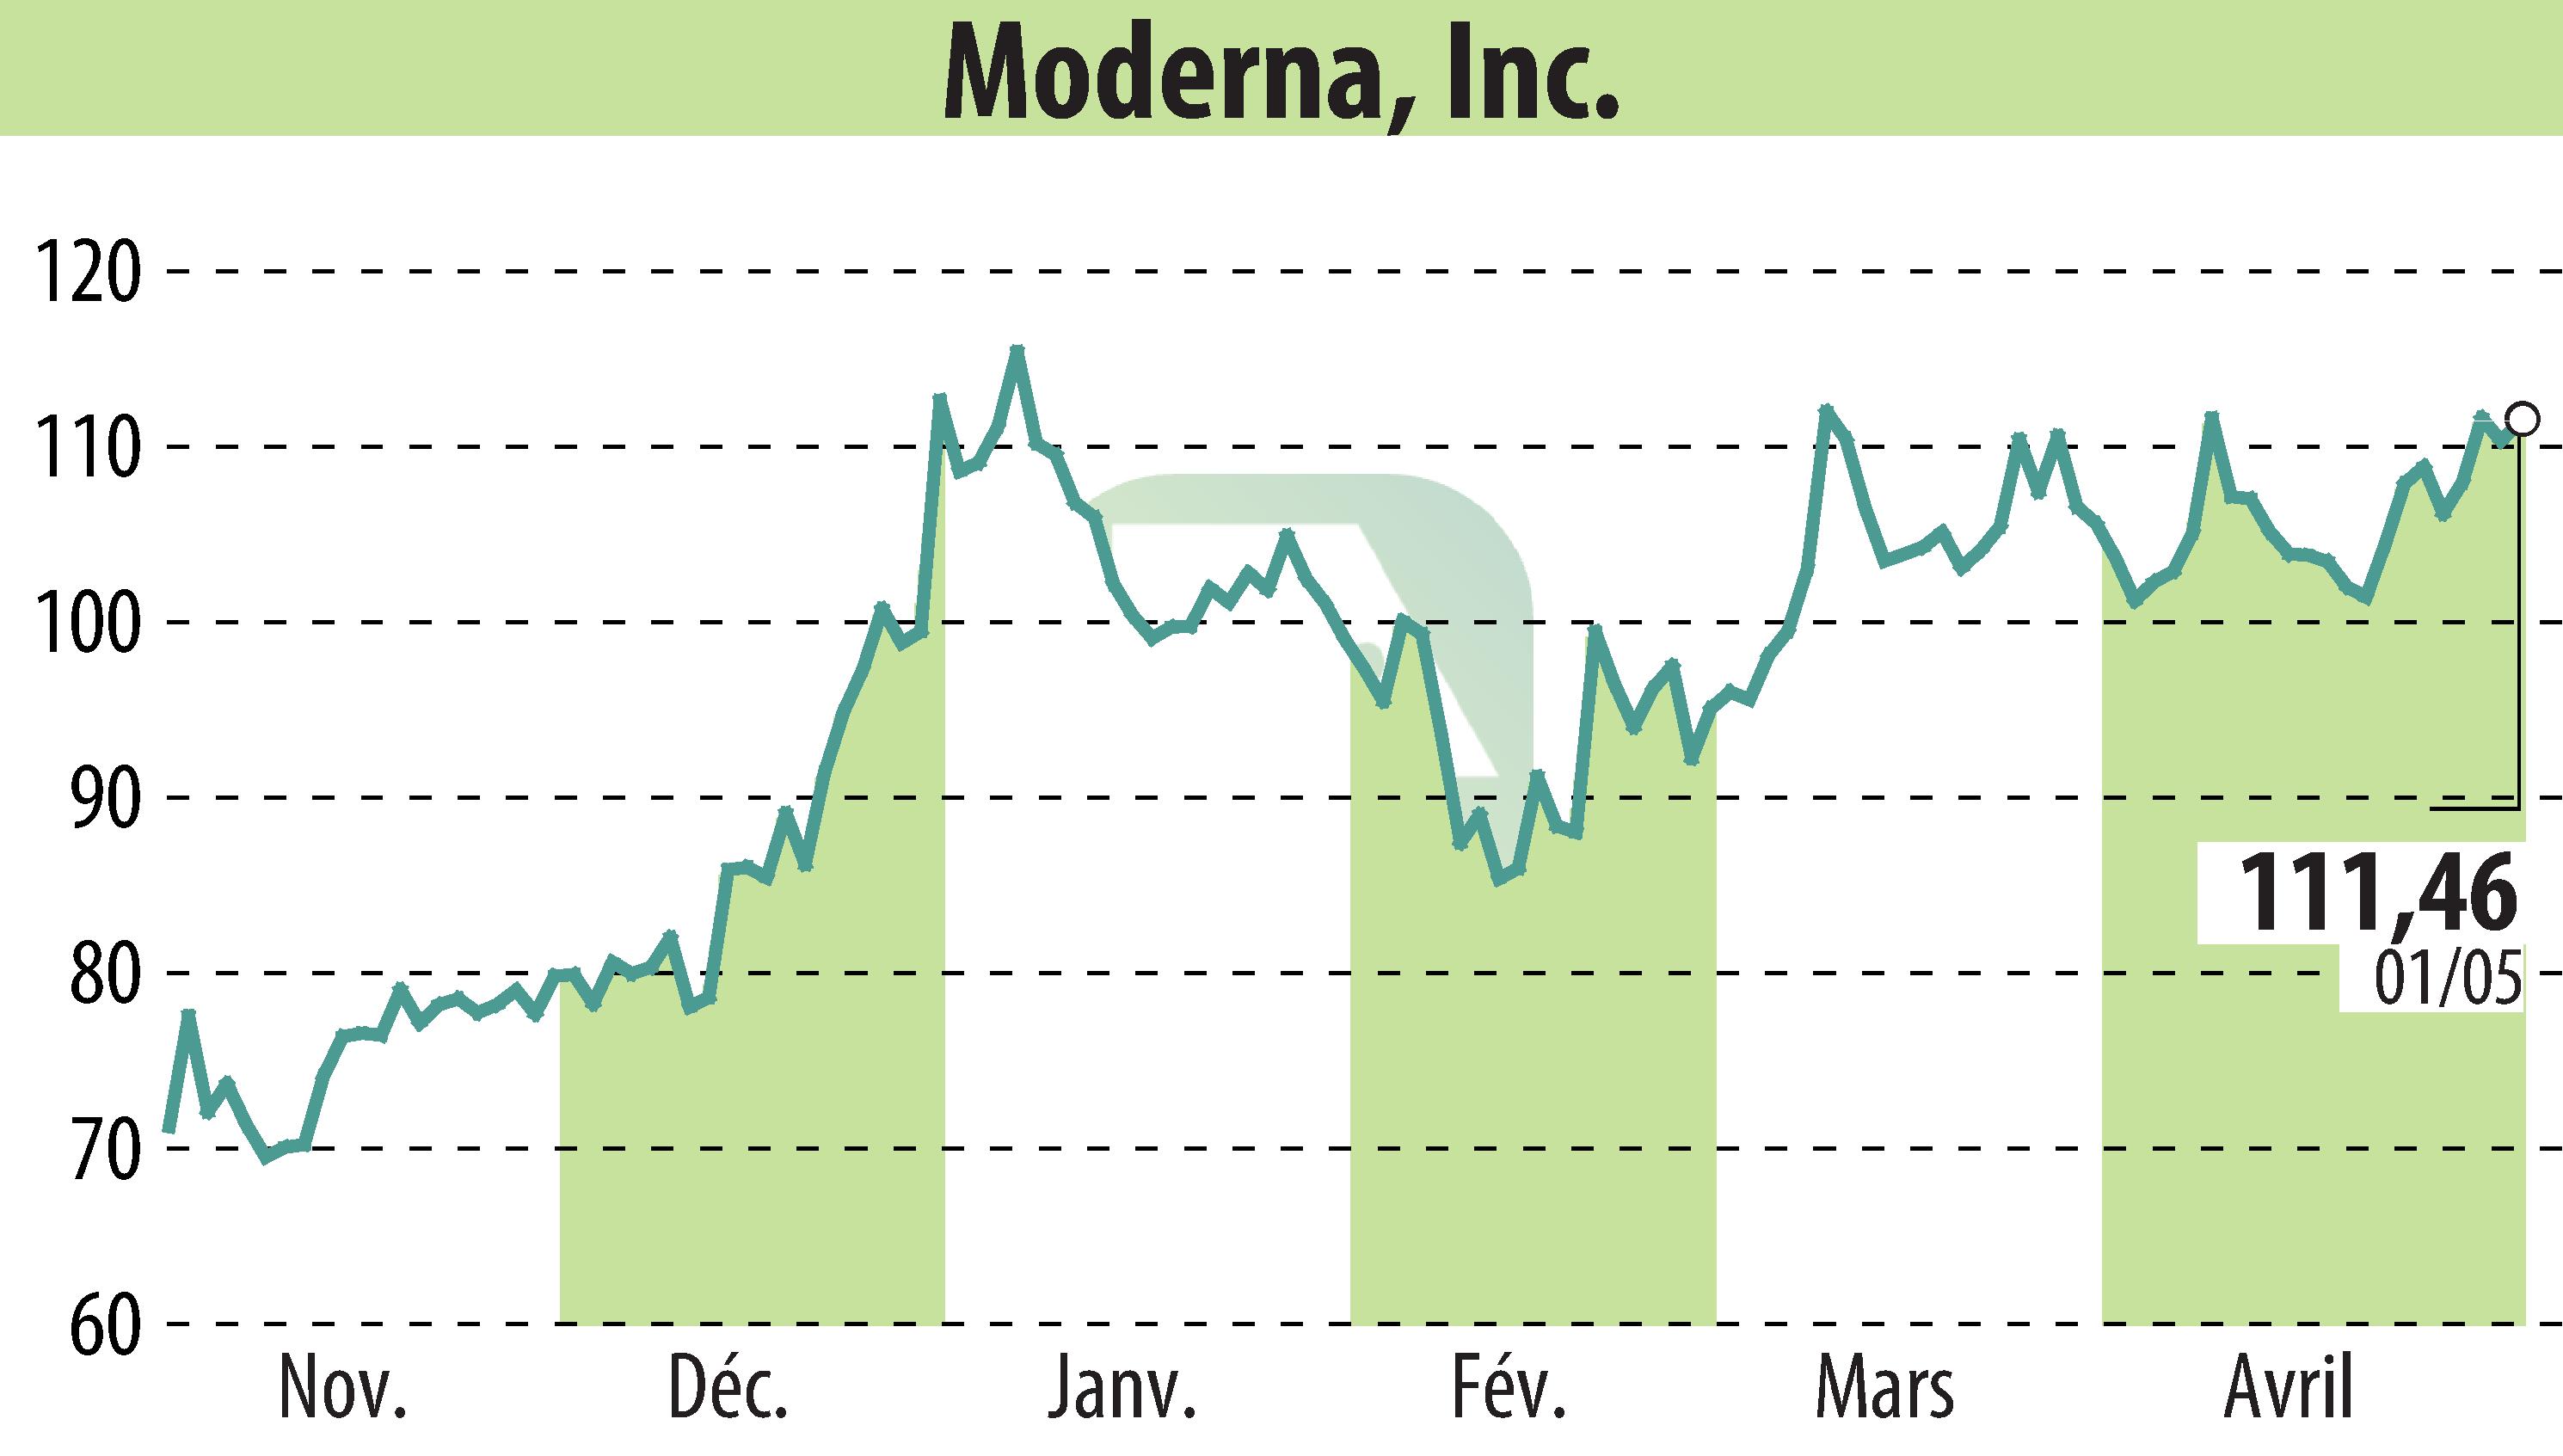 Stock price chart of Moderna, Inc. (EBR:MRNA) showing fluctuations.